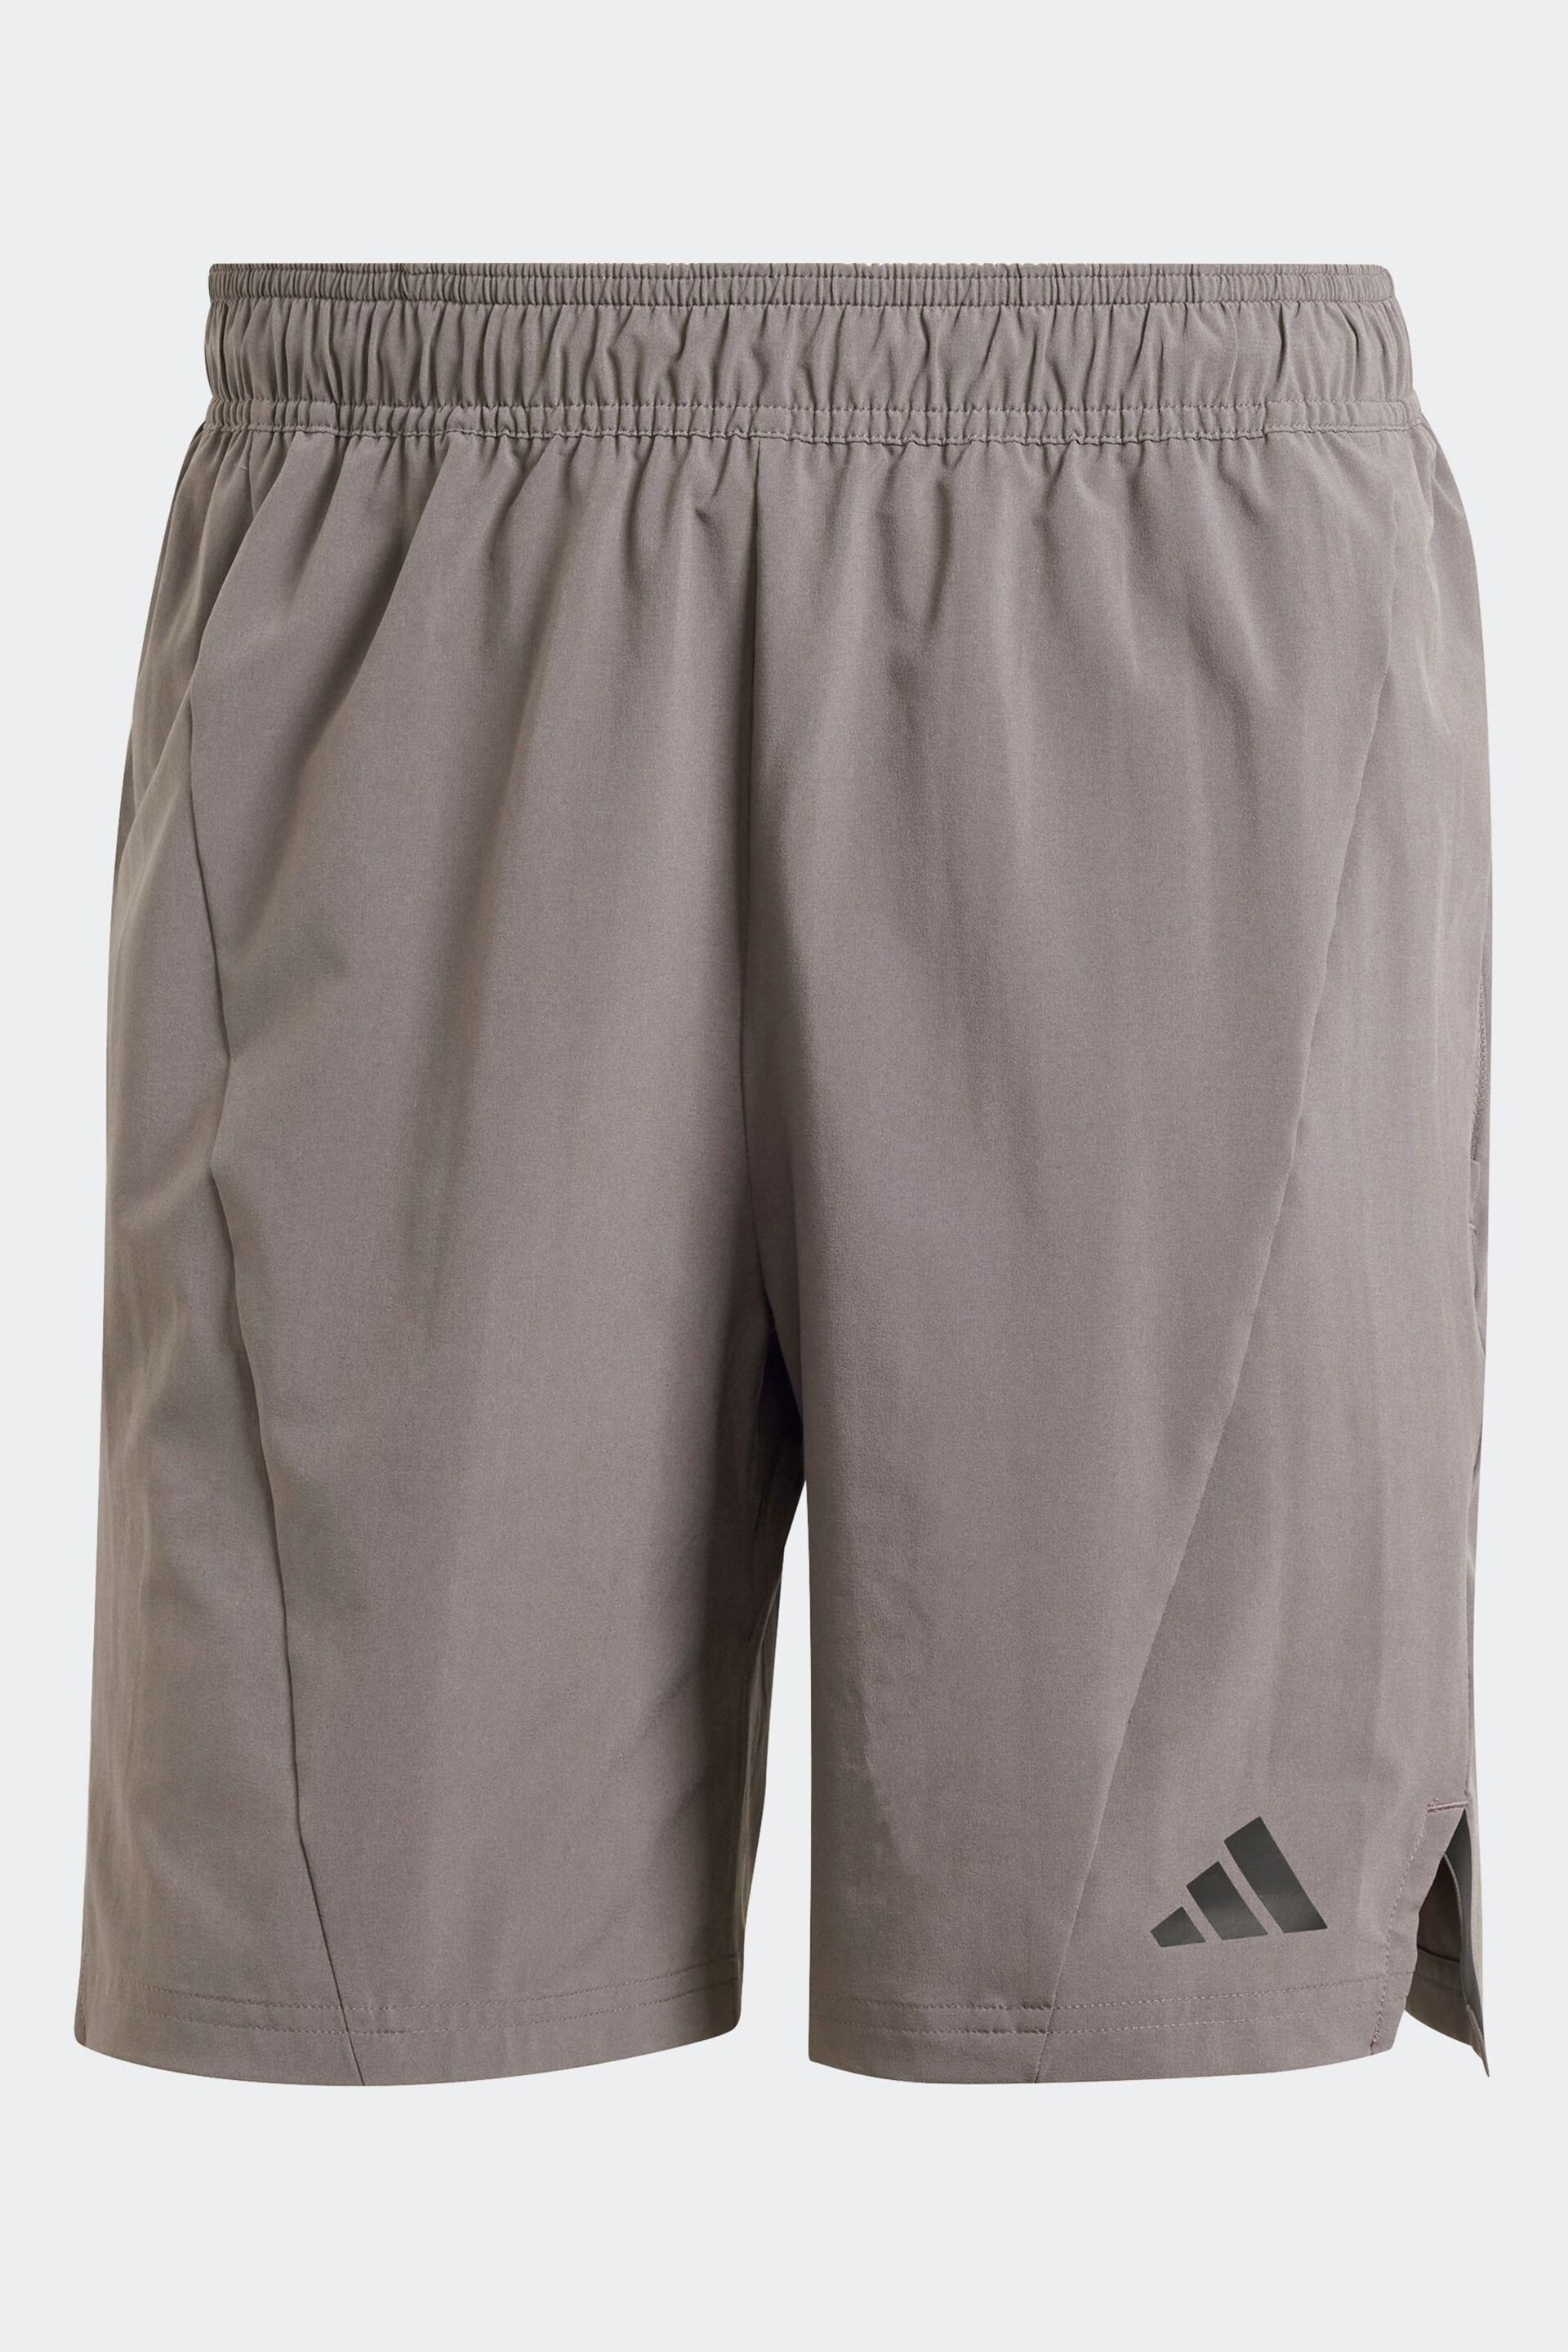 adidas Brown Designed for Training Workout Shorts - Image 5 of 6